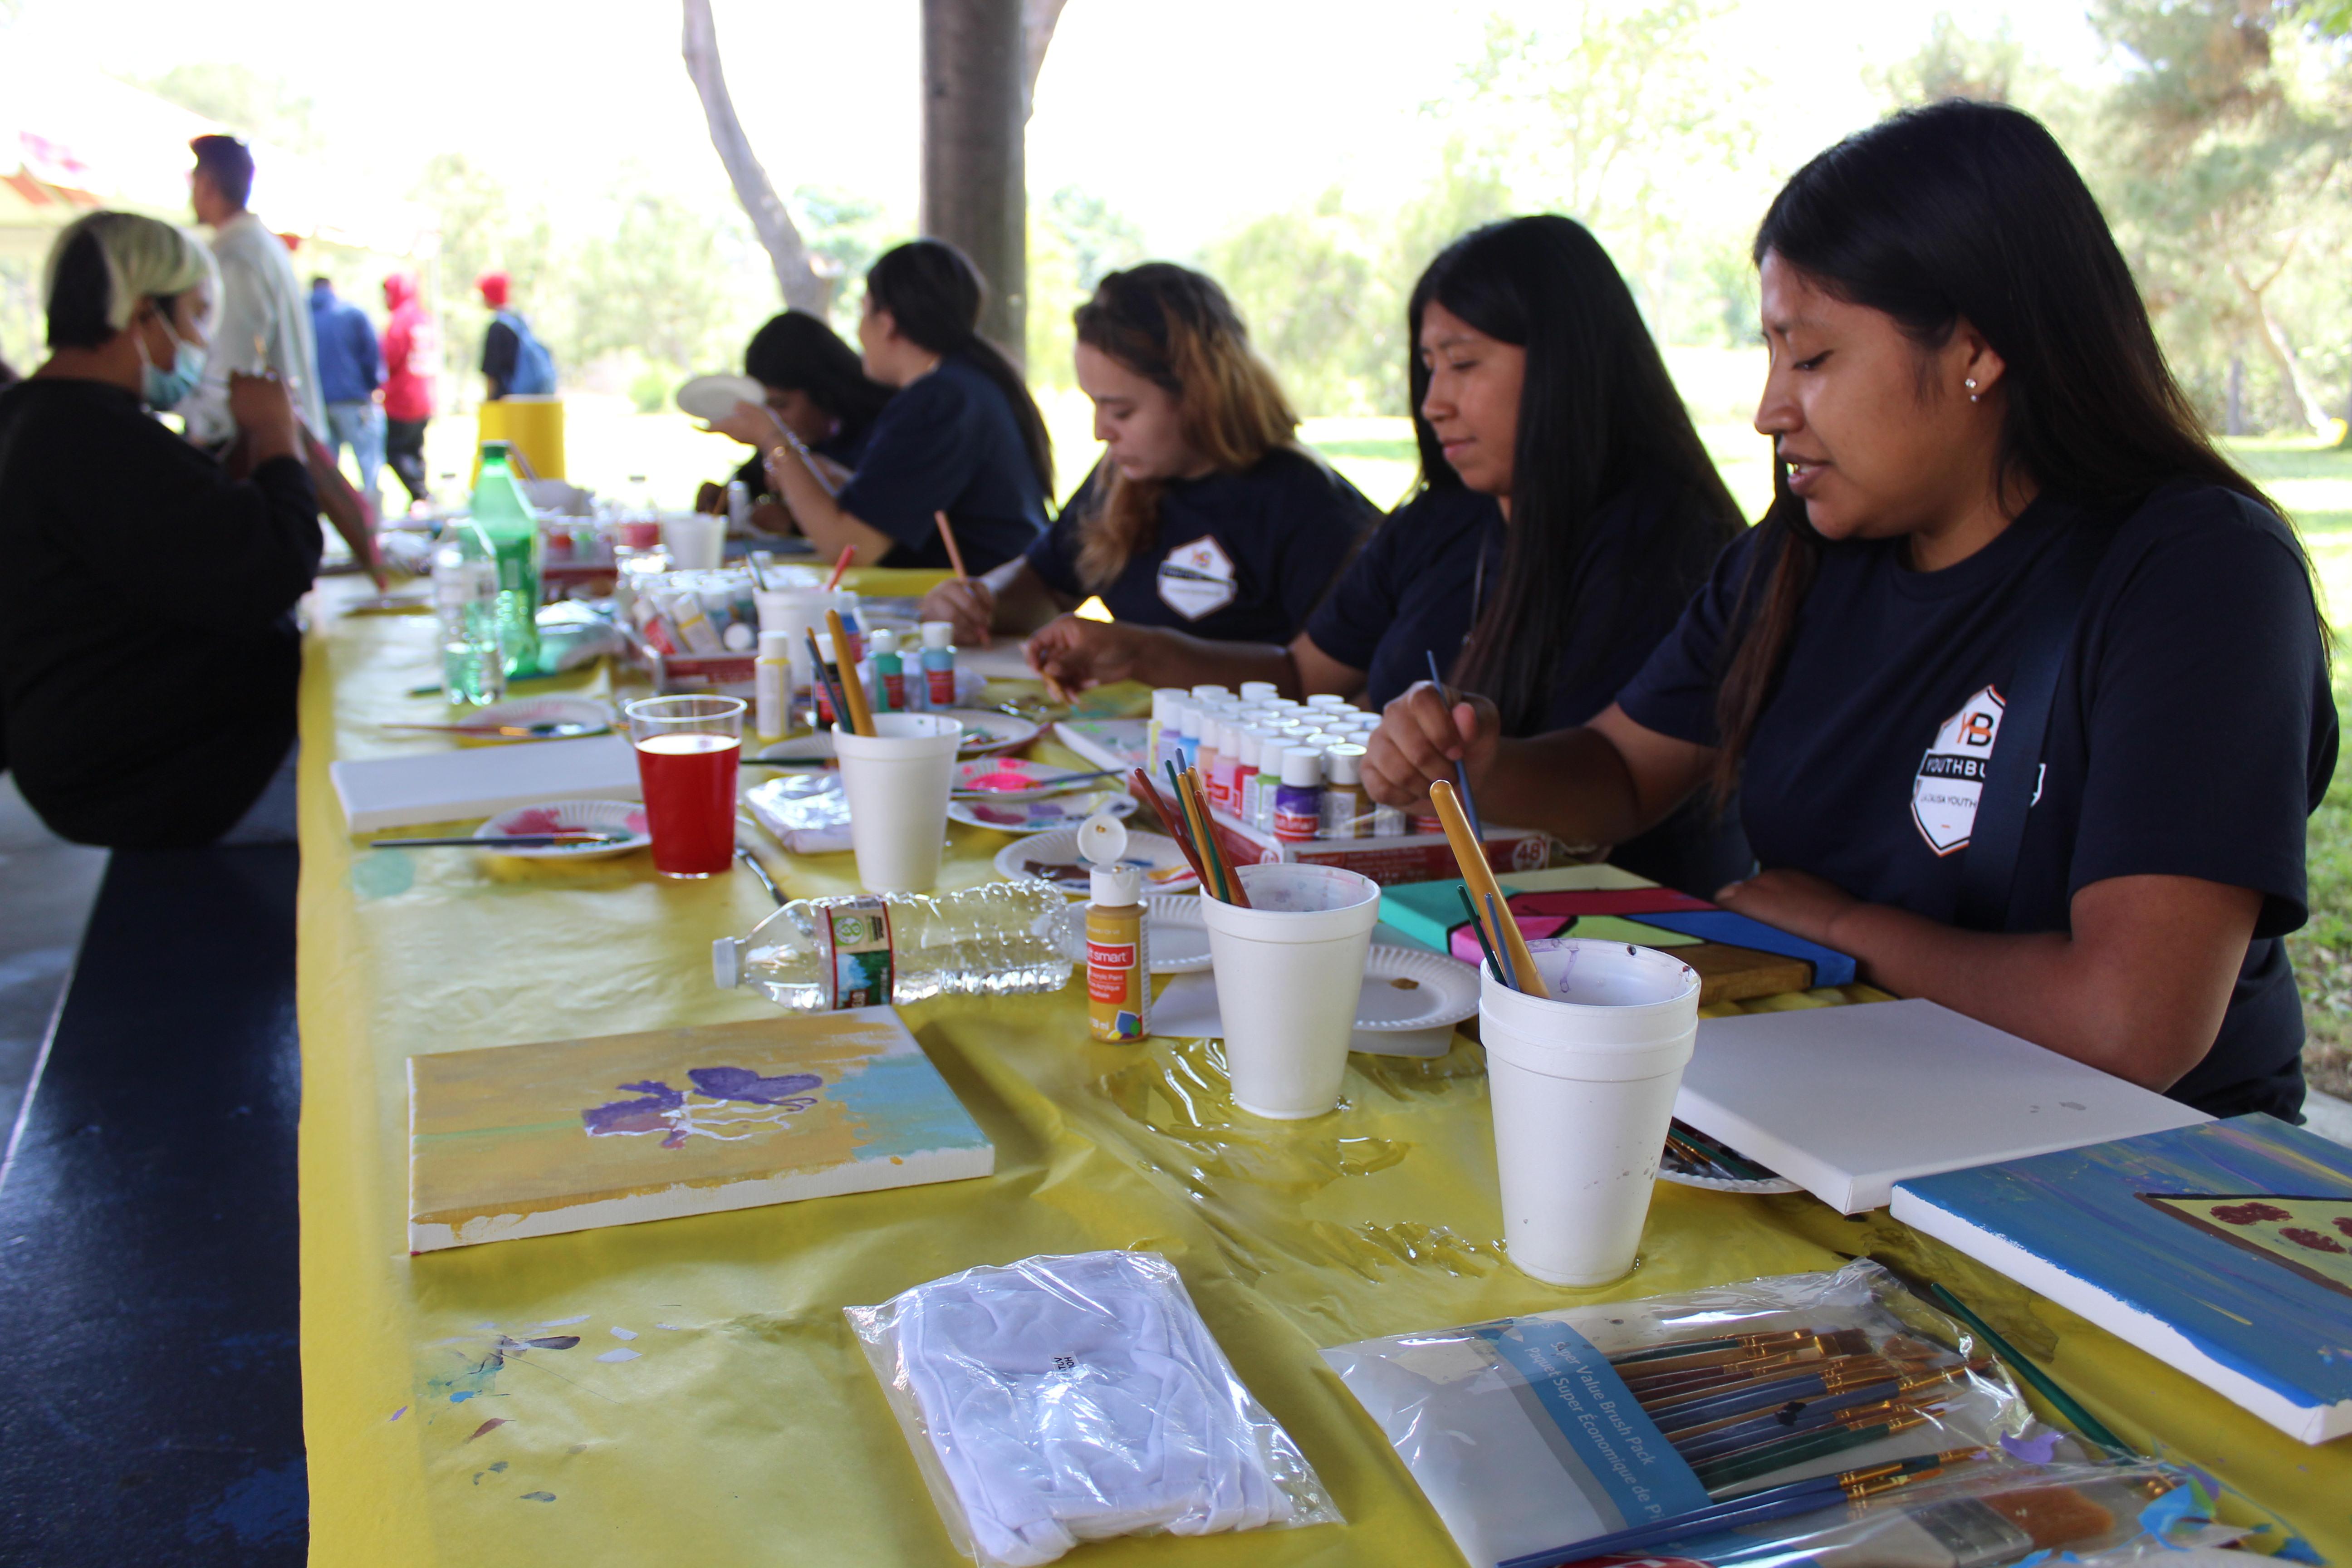 LA CAUSA students working on art projects